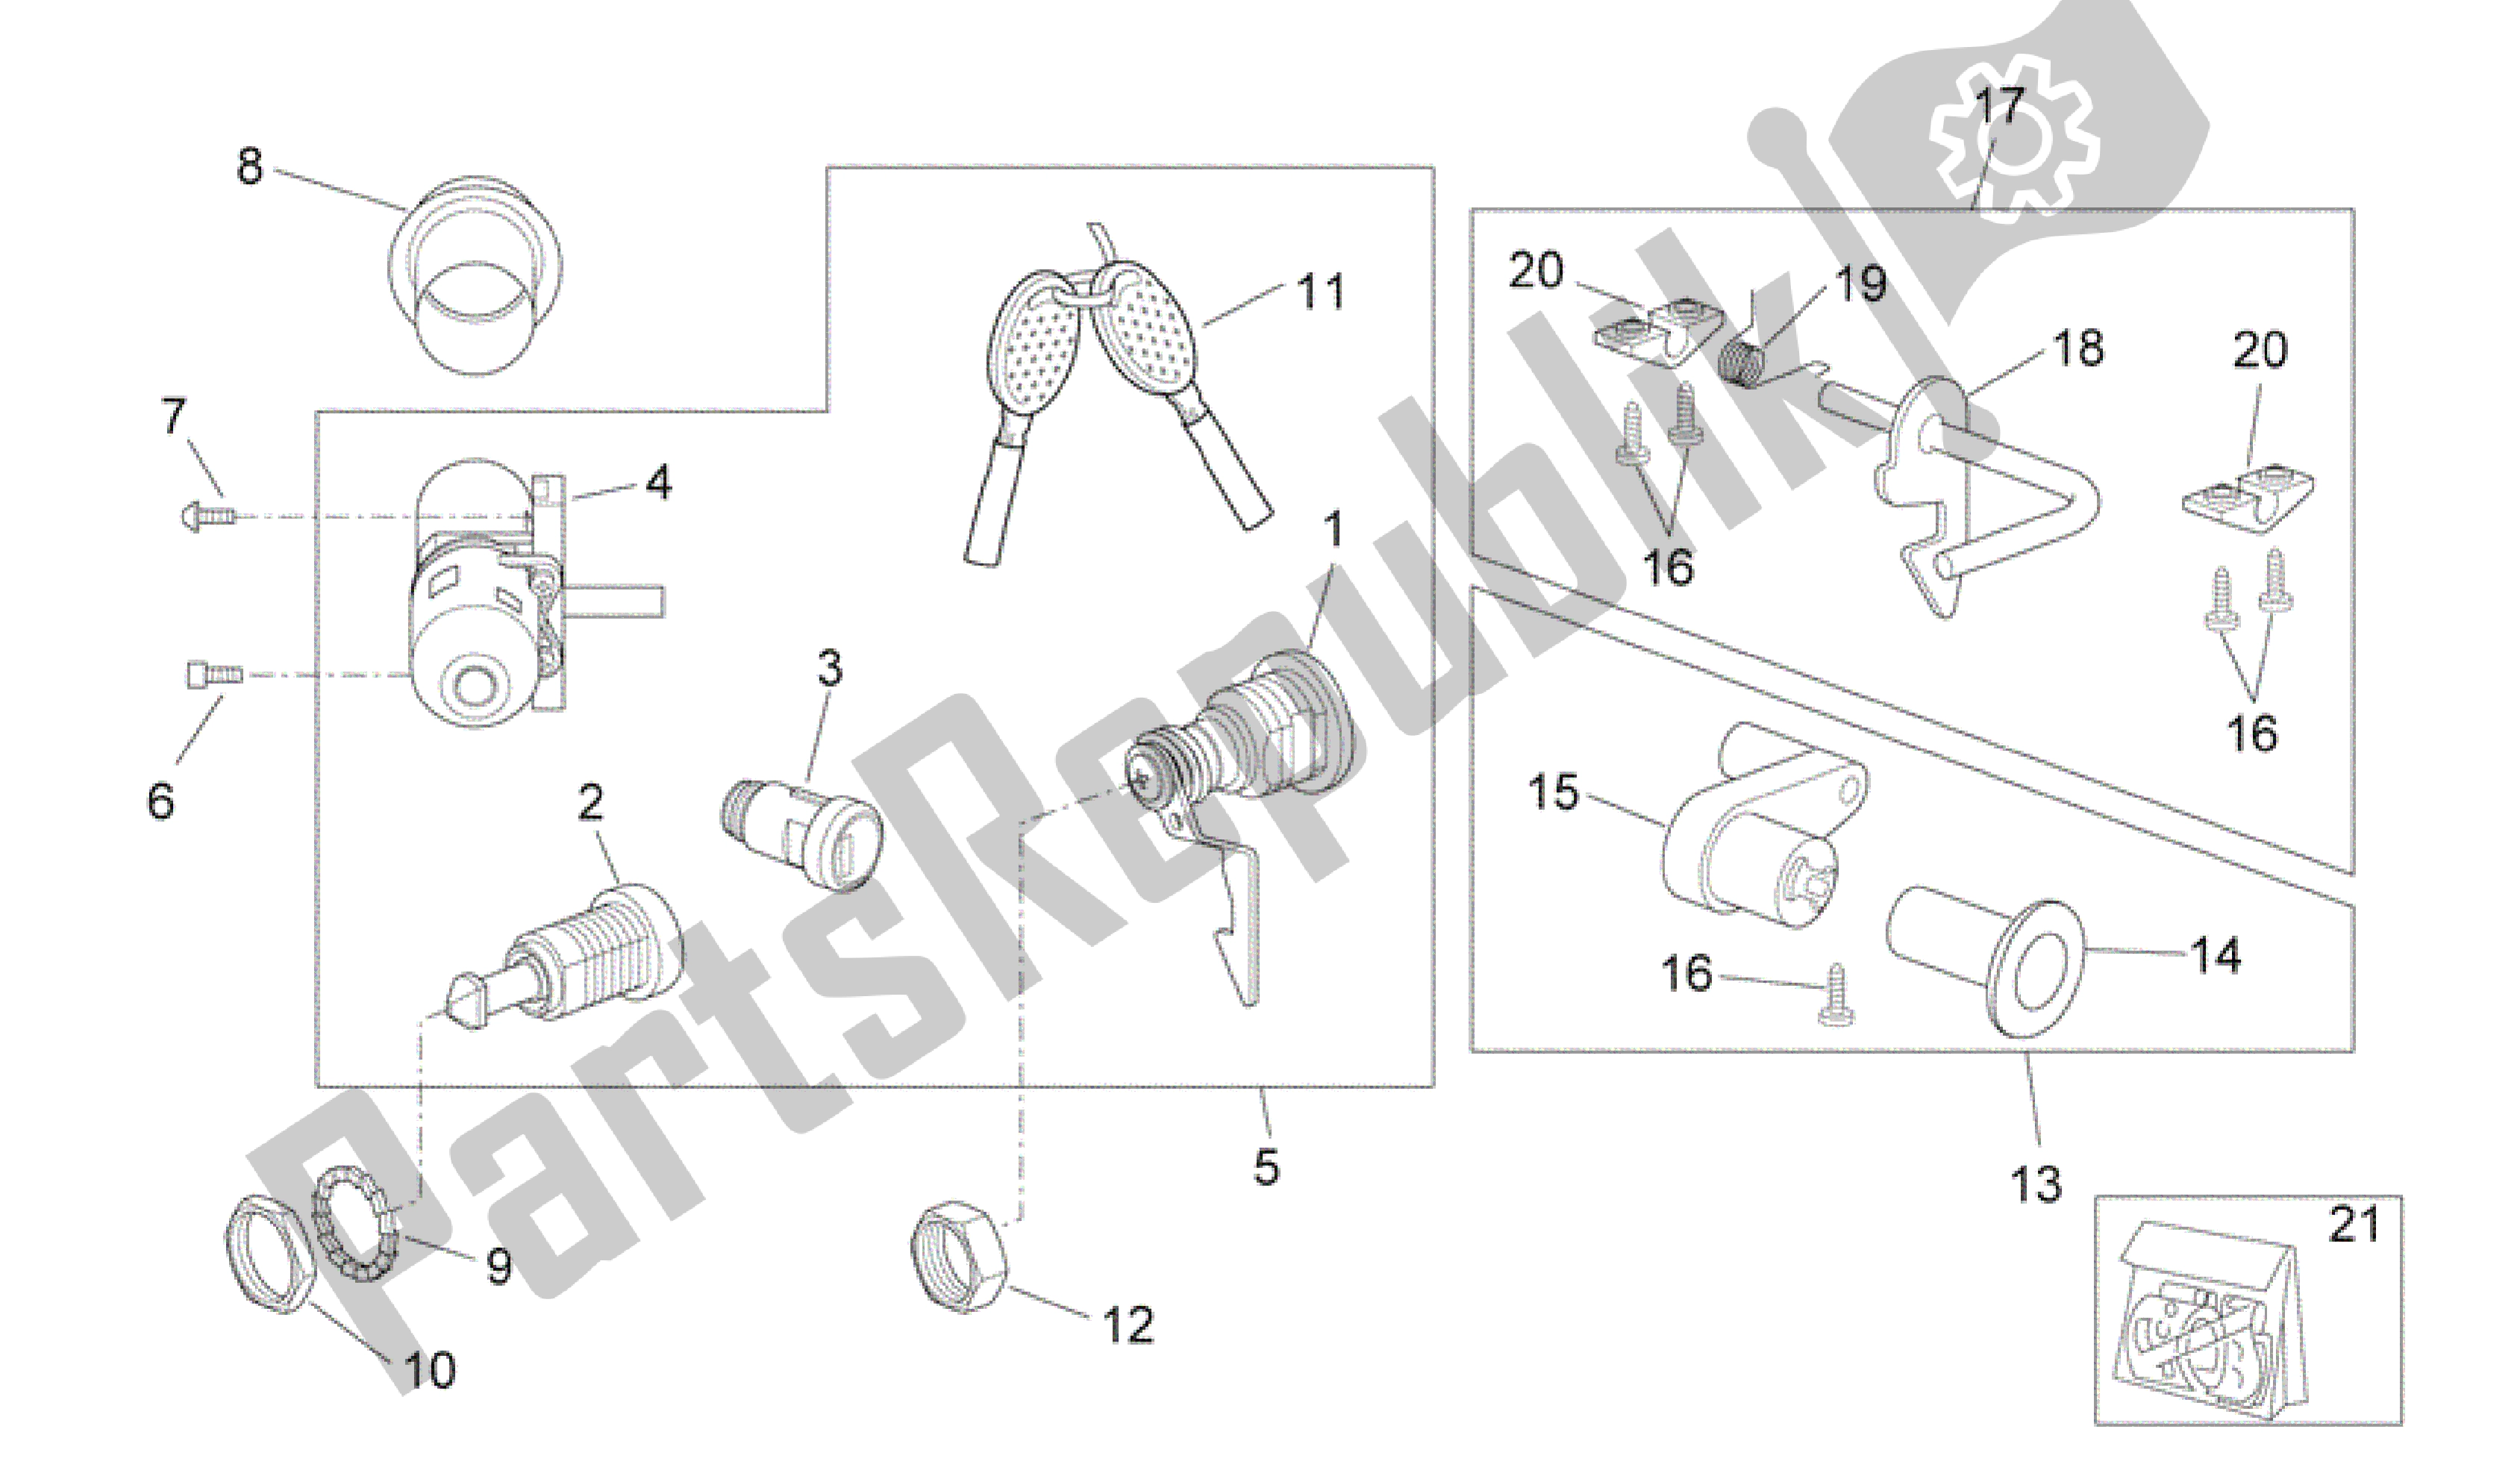 All parts for the Decal - Lock Hardware Kit of the Aprilia Scarabeo 100 2006 - 2009